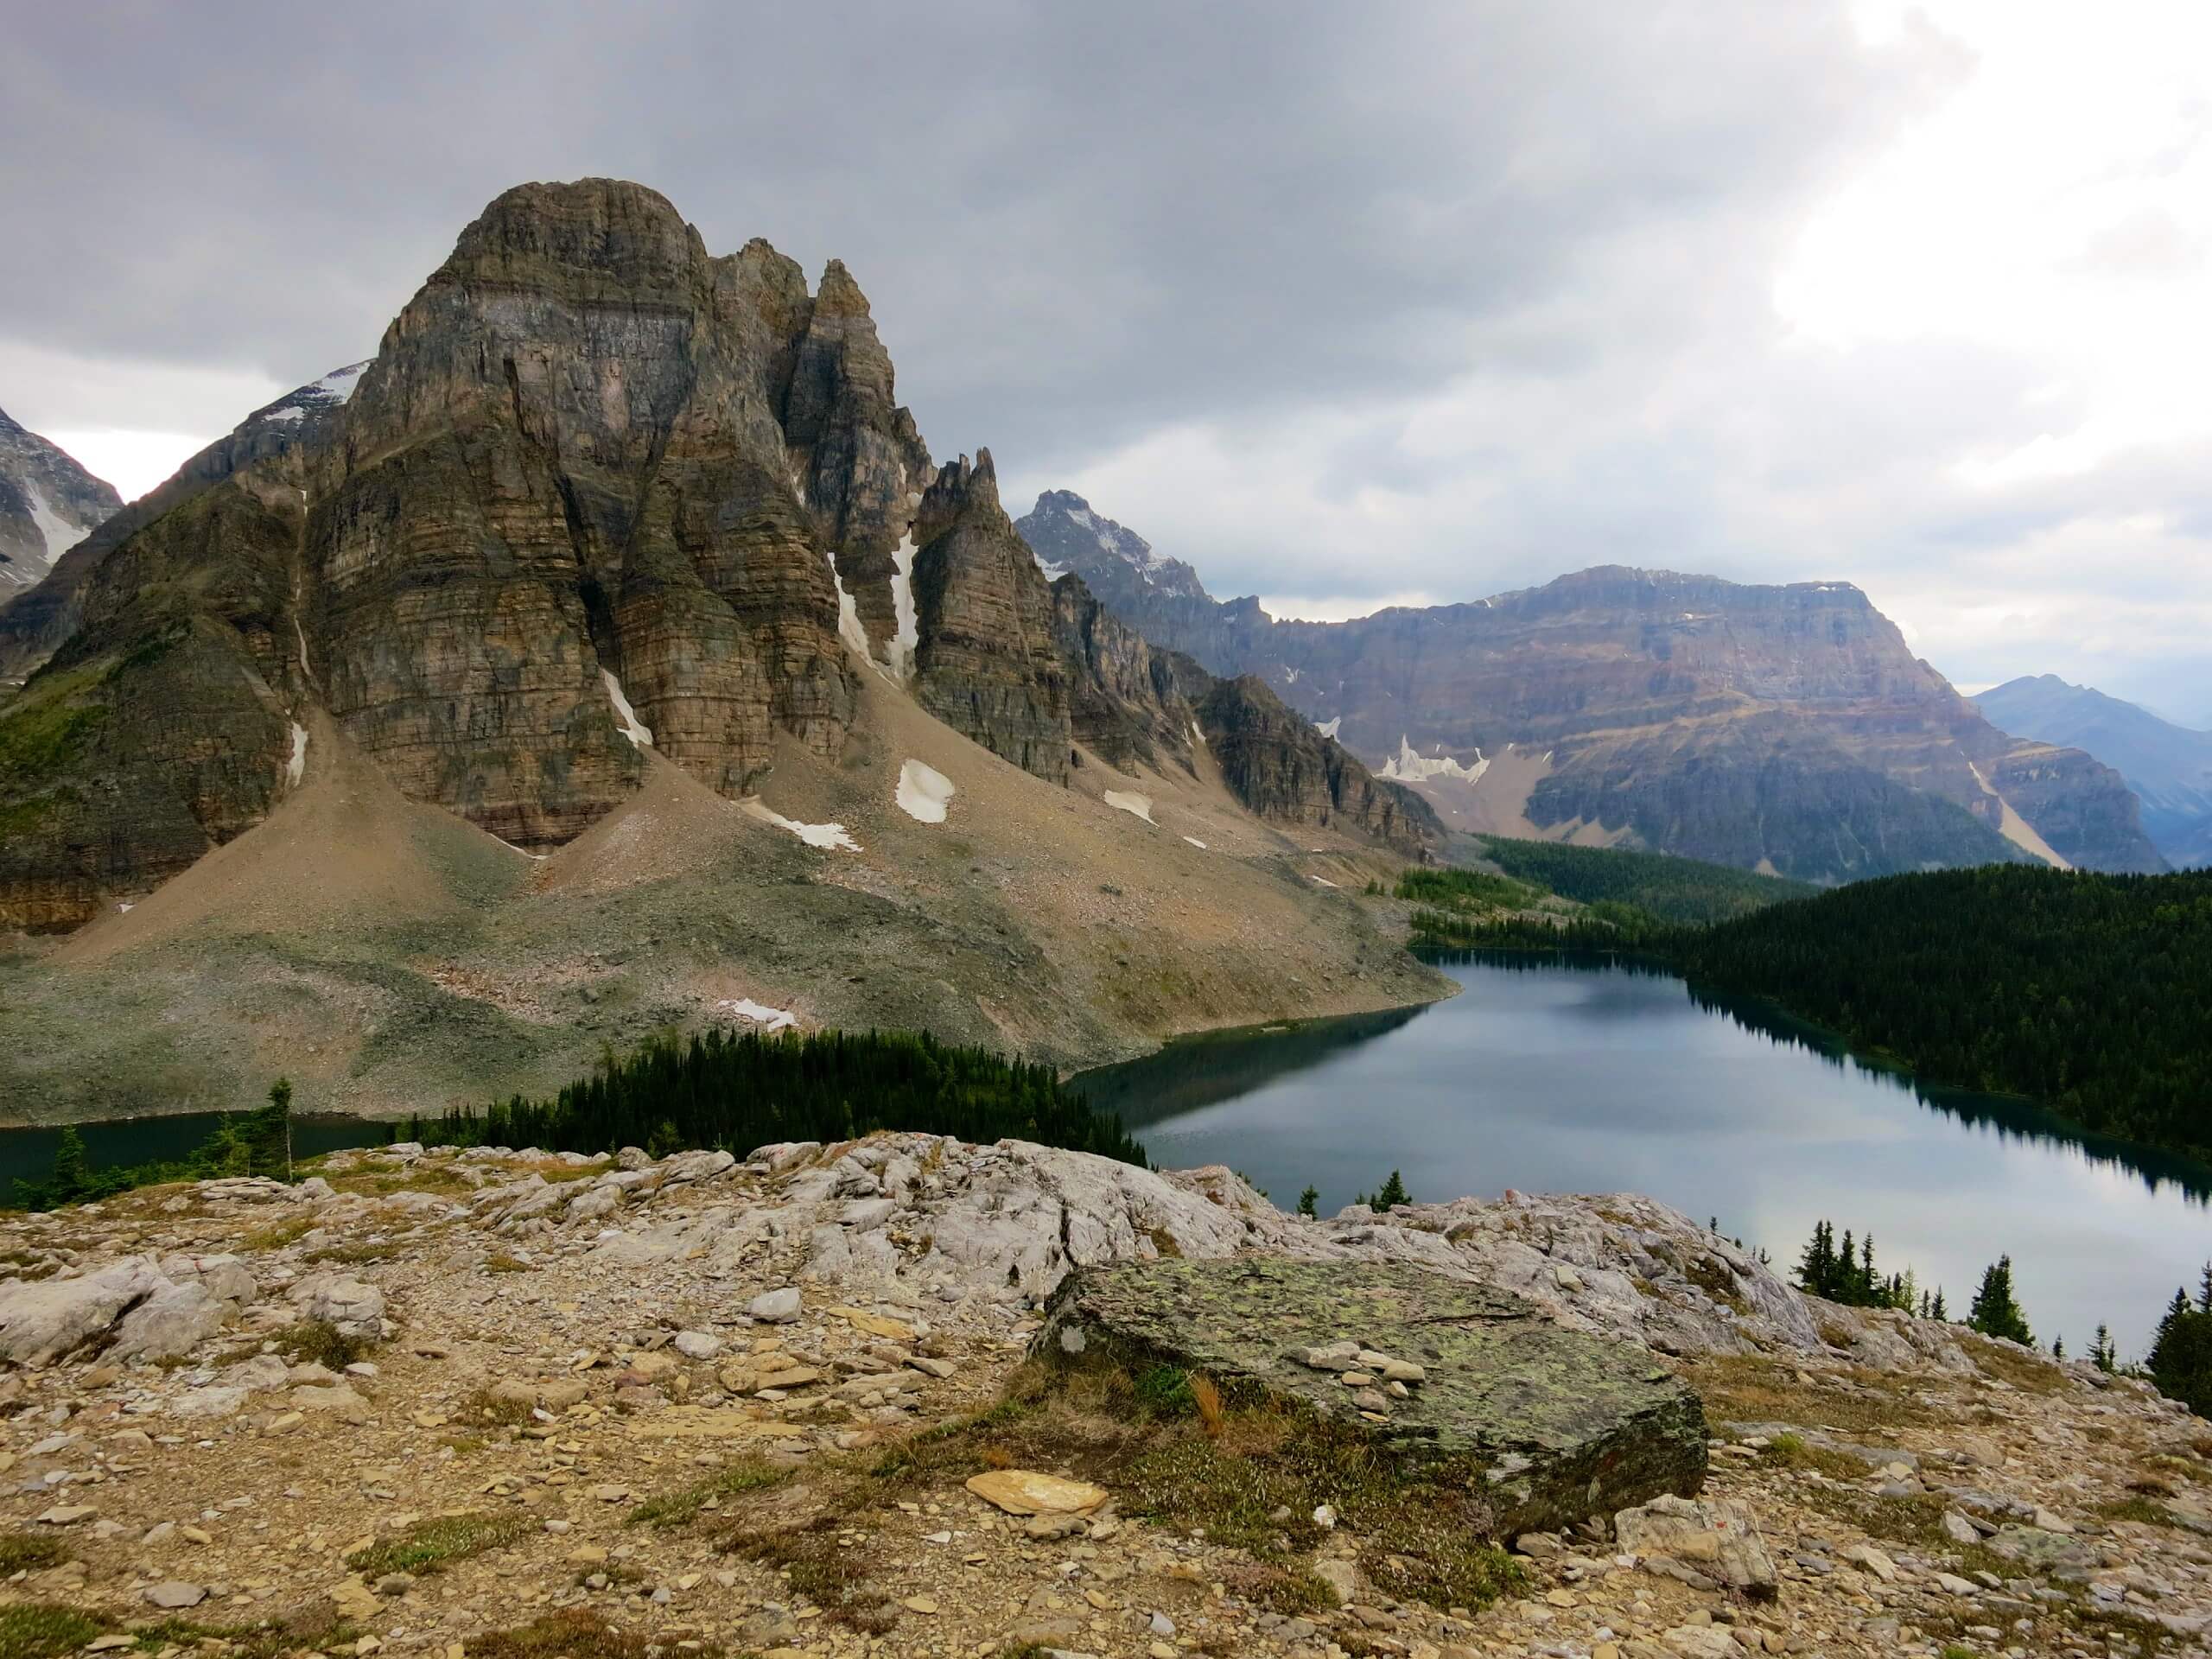 The Niblet & Nublet from Assiniboine Lodge Trail